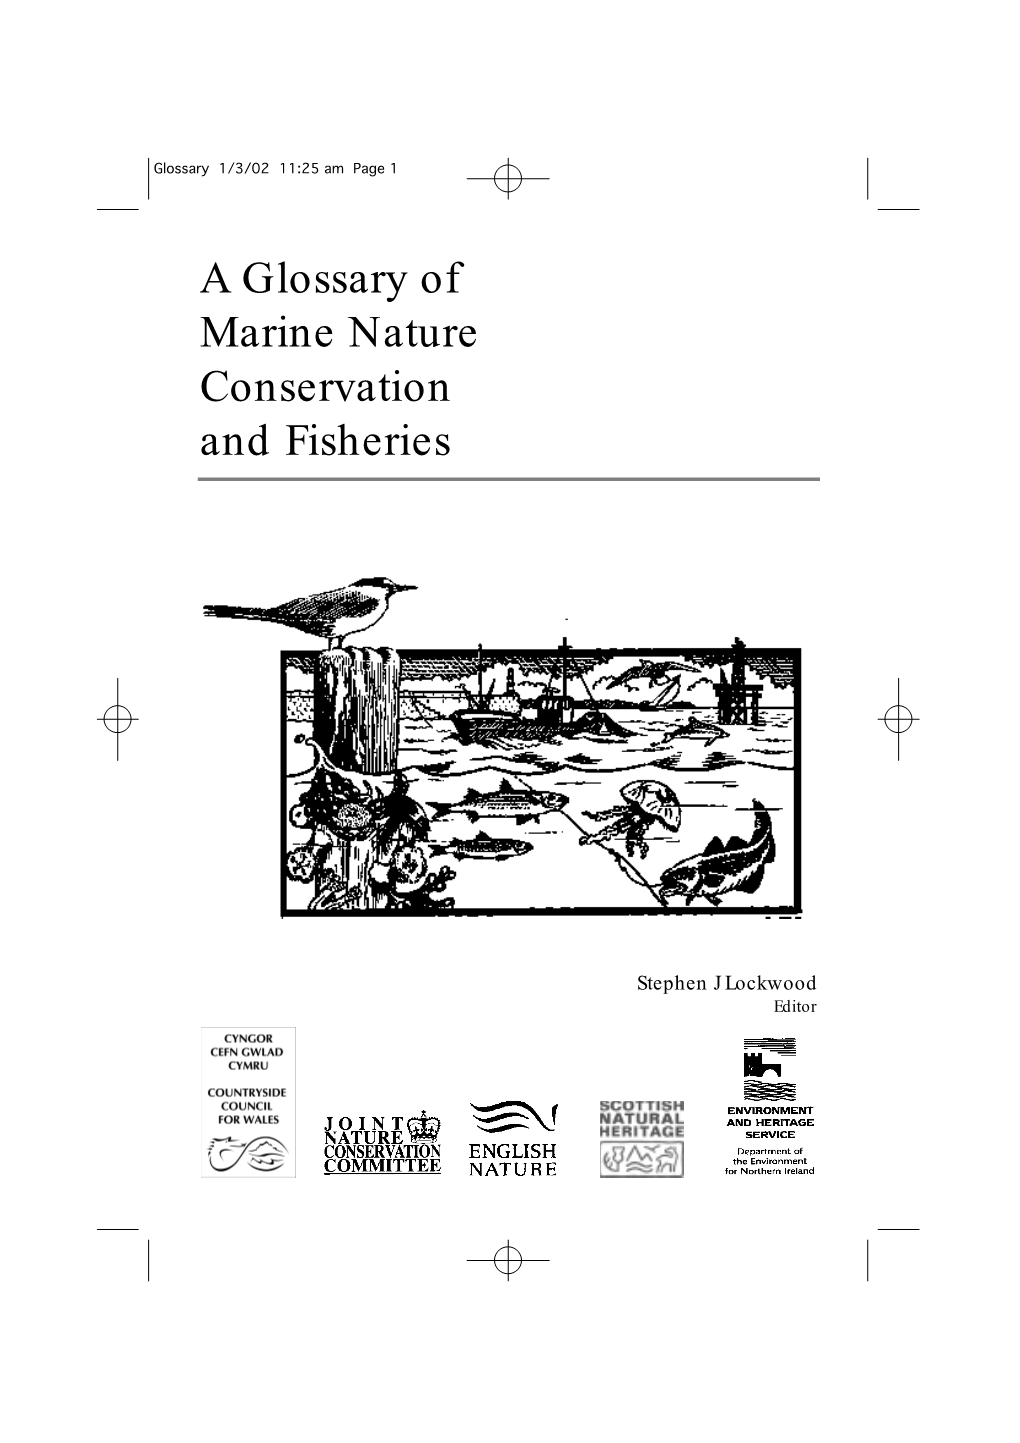 A Glossary of Marine Nature Conservation and Fisheries